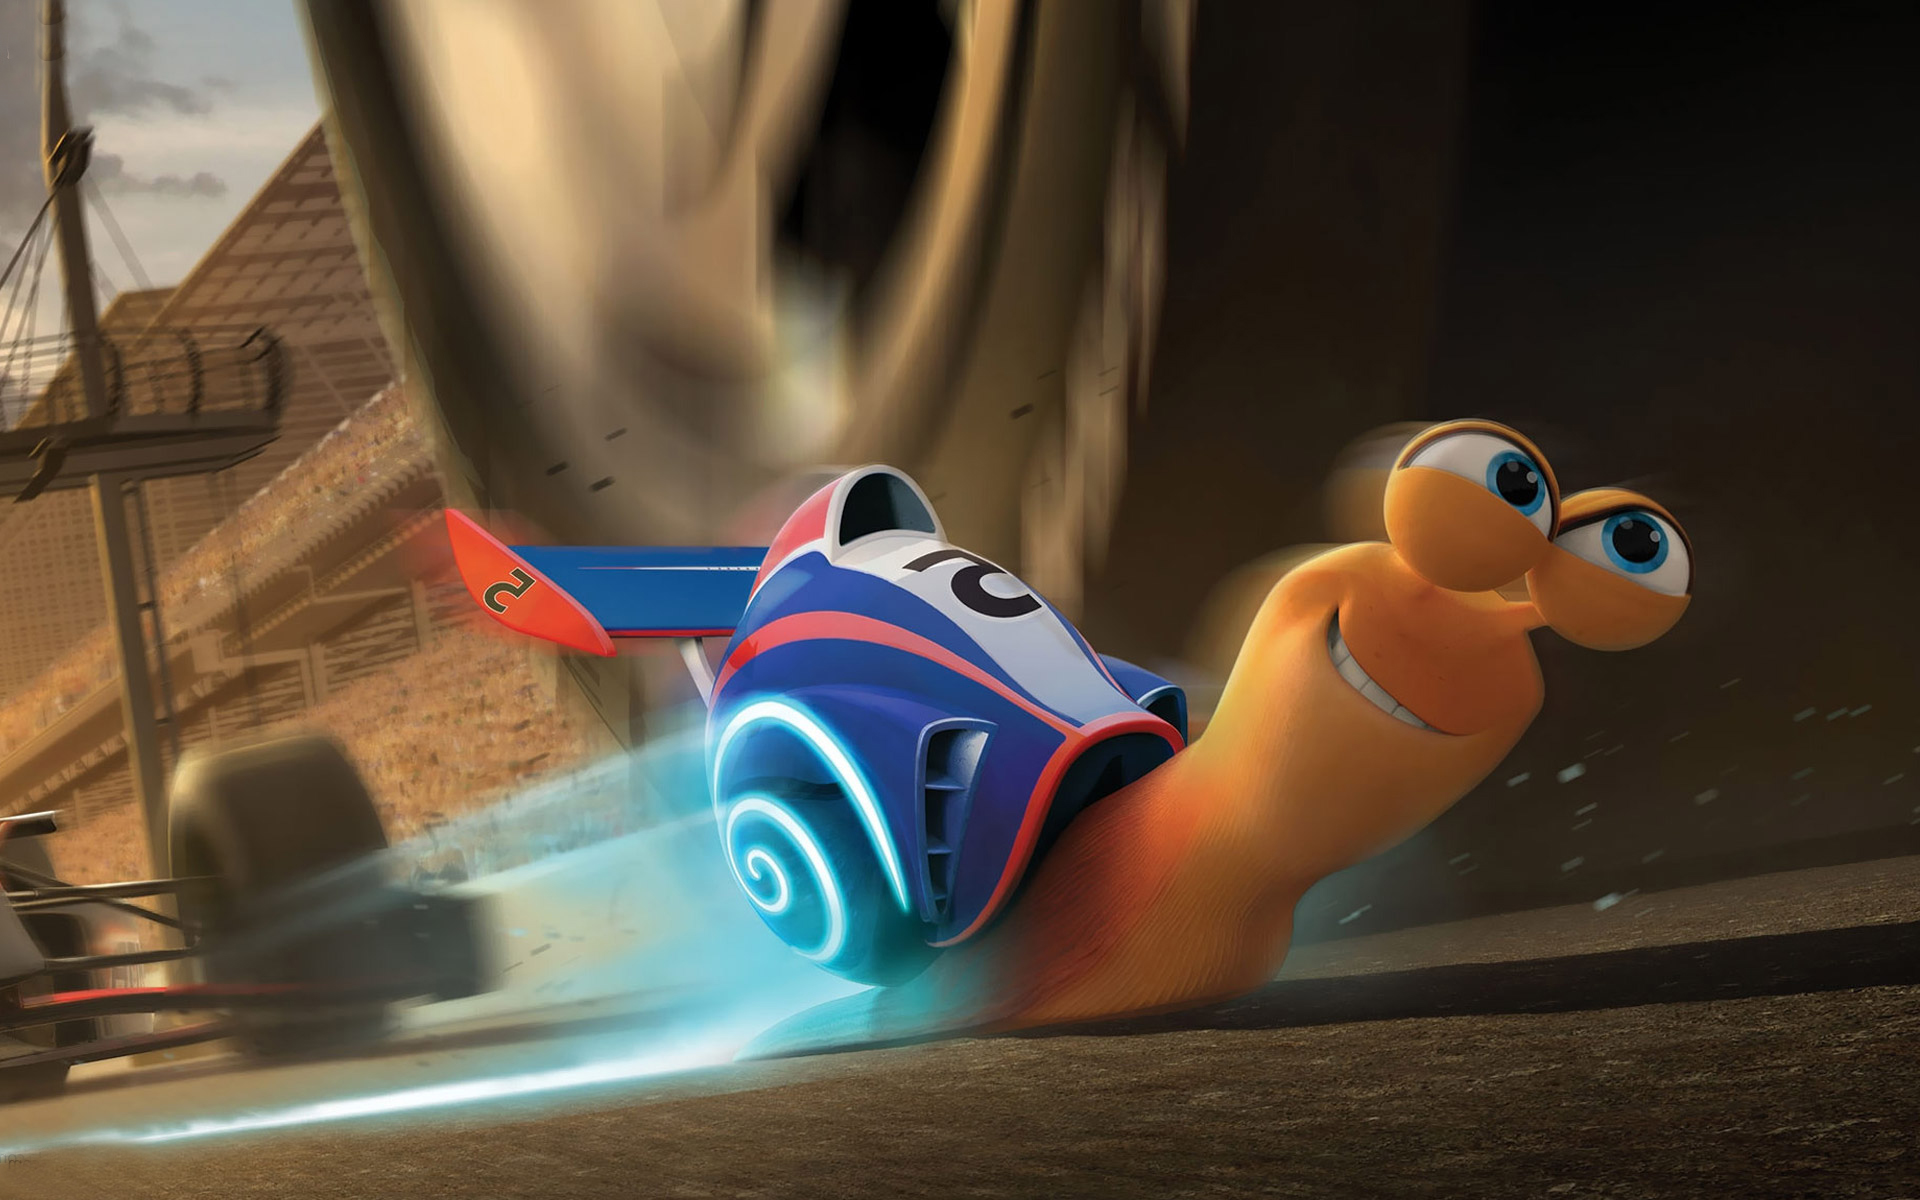 Theo/Turbo (voiced by Ryan Reynolds), the snail who determines to enter the Indy 500 in Turbo (2013)